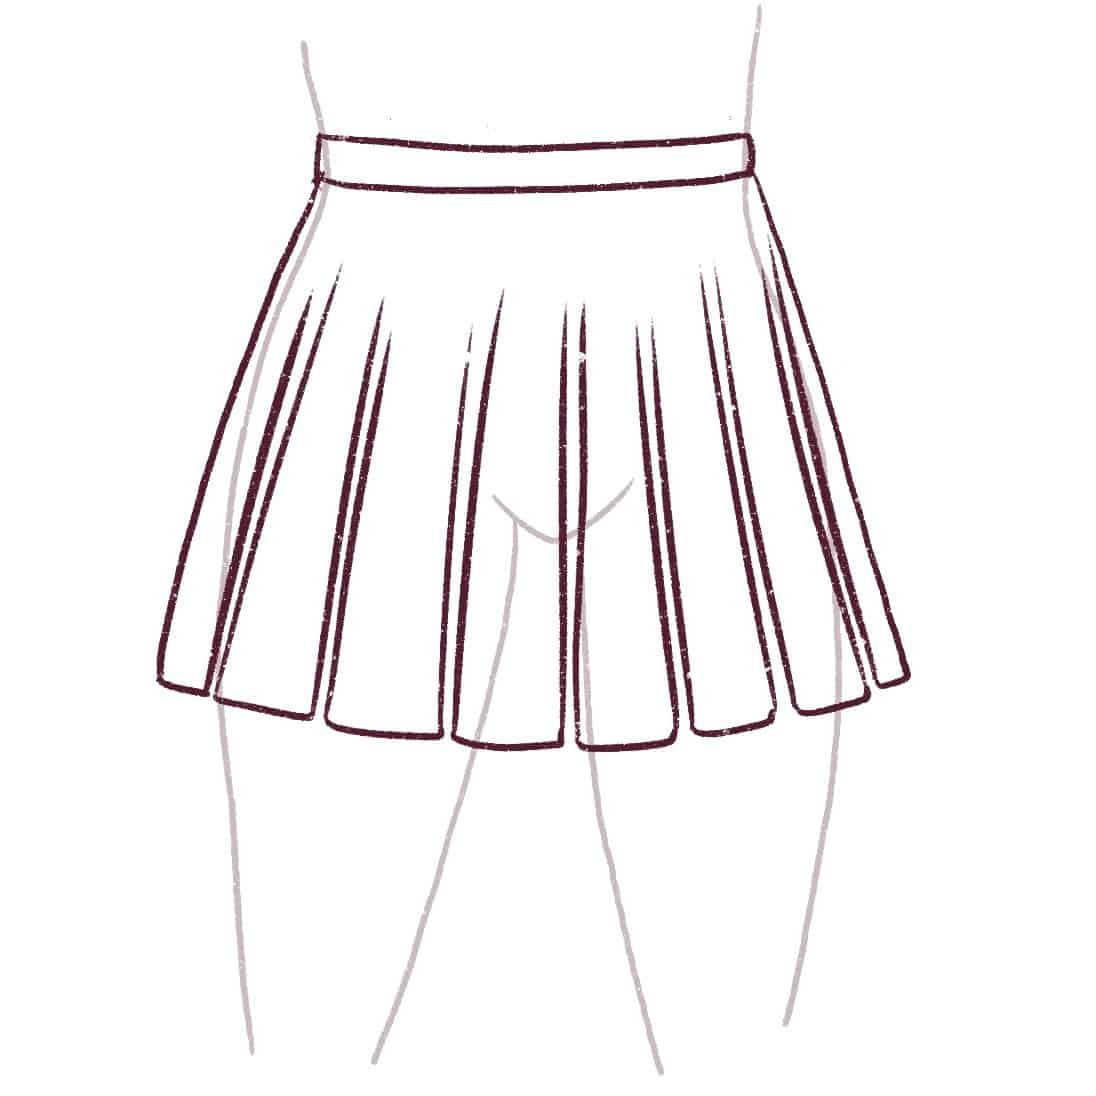 How to draw a pleated skirt (for anime) - Draw Cartoon Style!